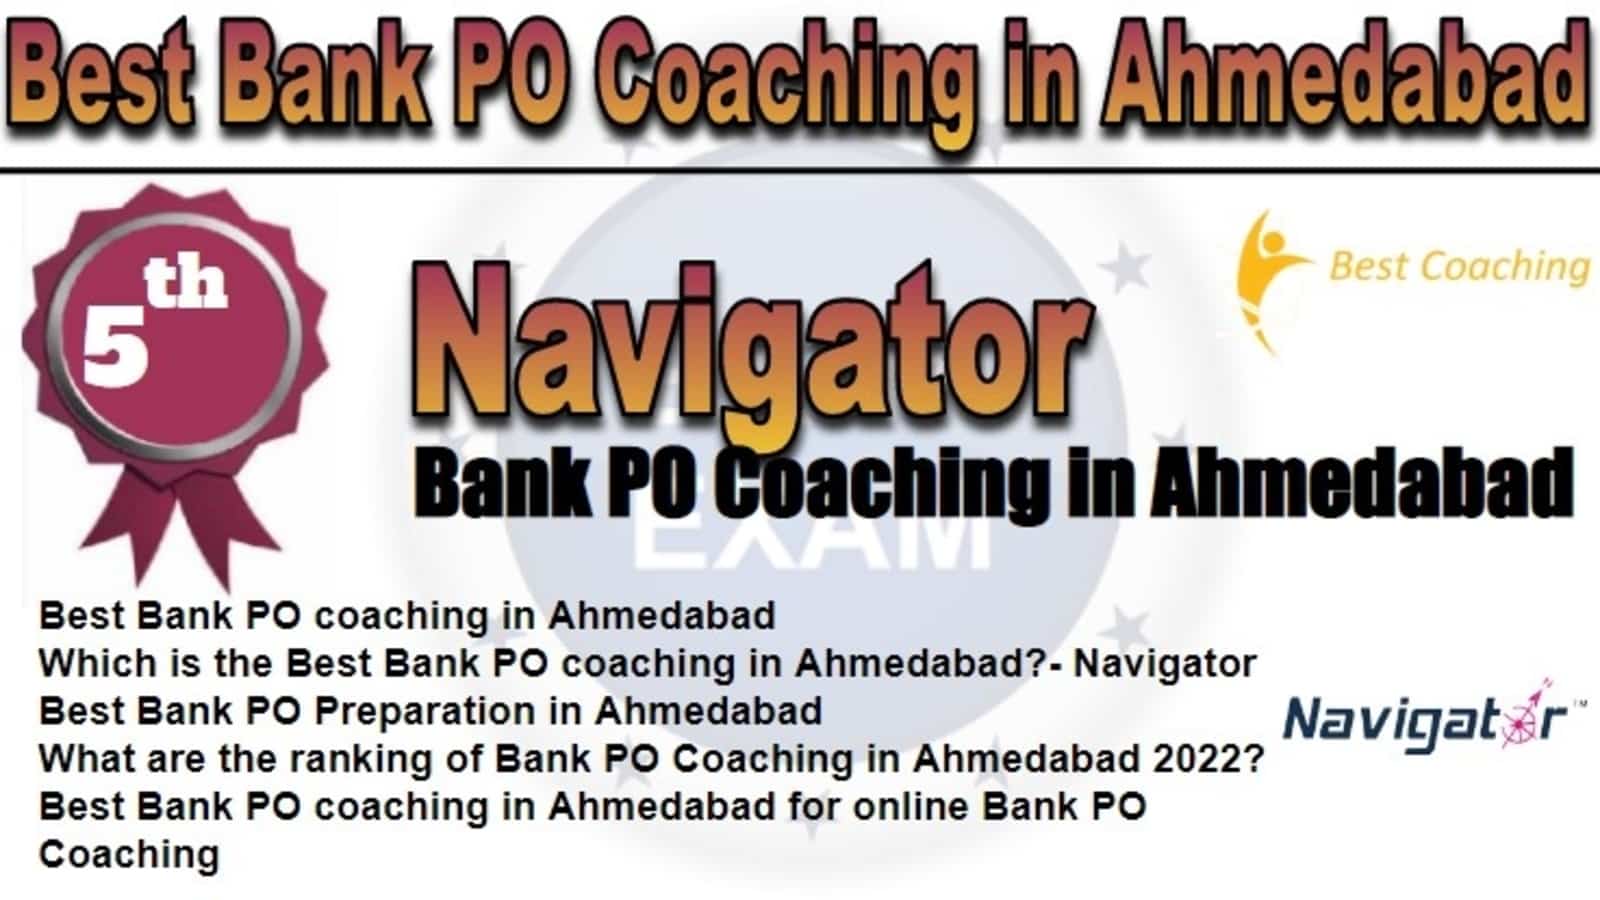 Rank 5 Best Bank PO Coaching in Ahmedabad